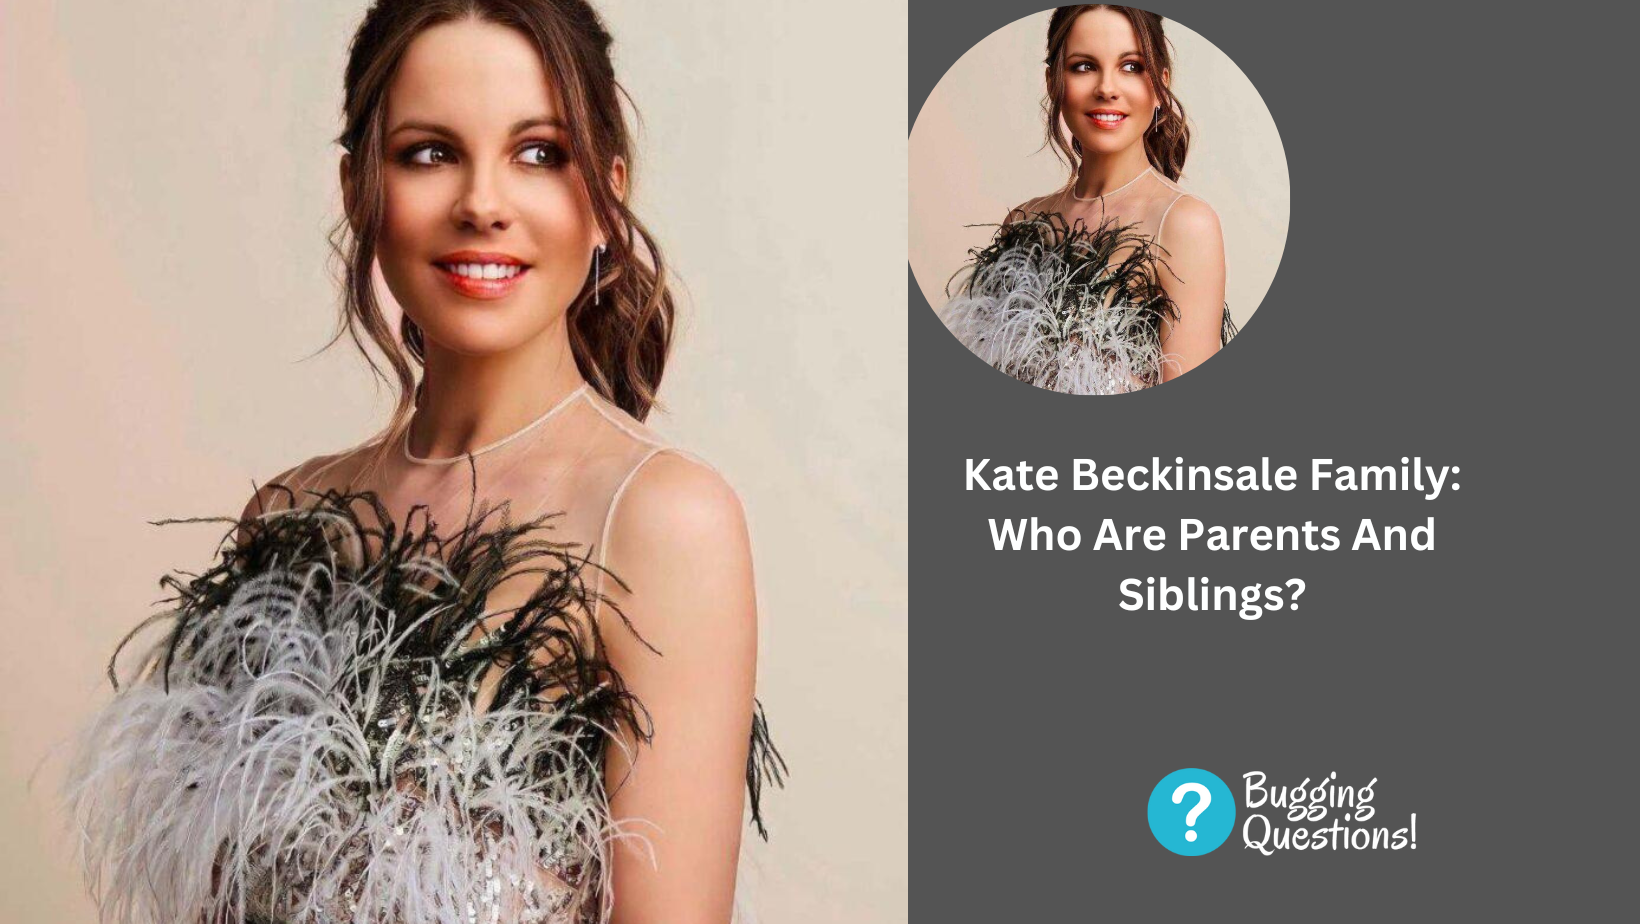 Kate Beckinsale Family: Who Are Parents And Siblings?